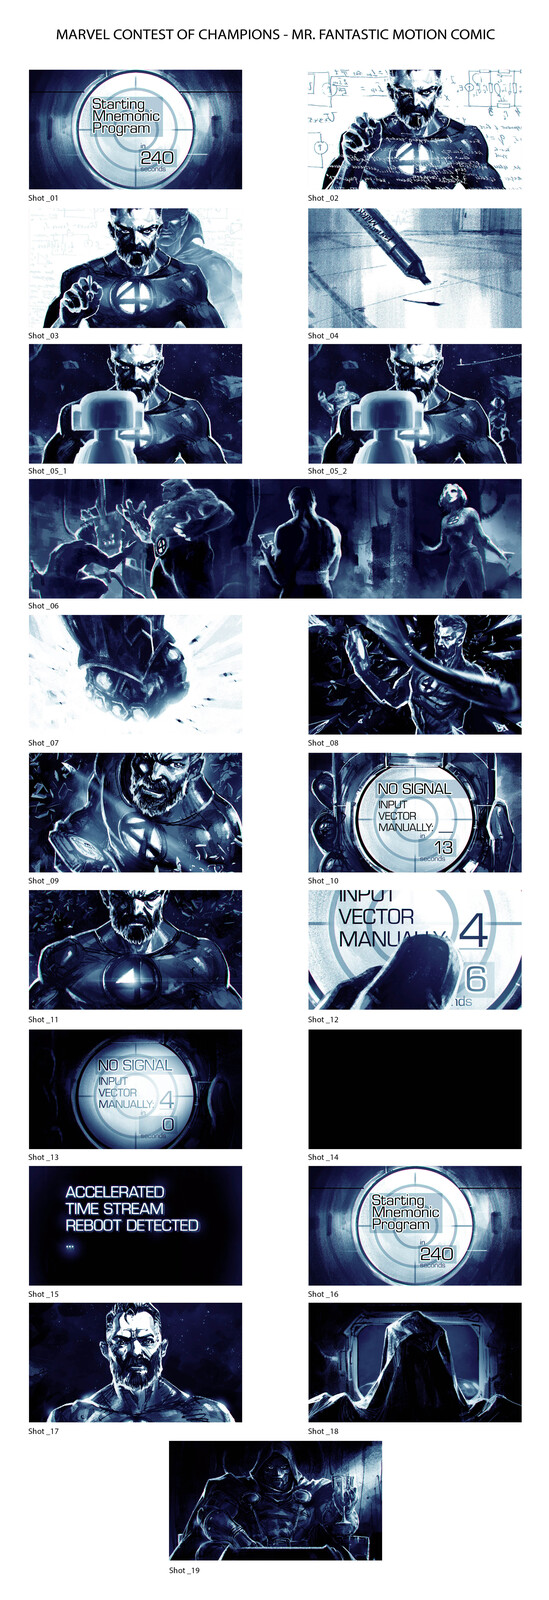 When Titans Clash! Motion Comic Storyboard - Marvel Contest of Champions